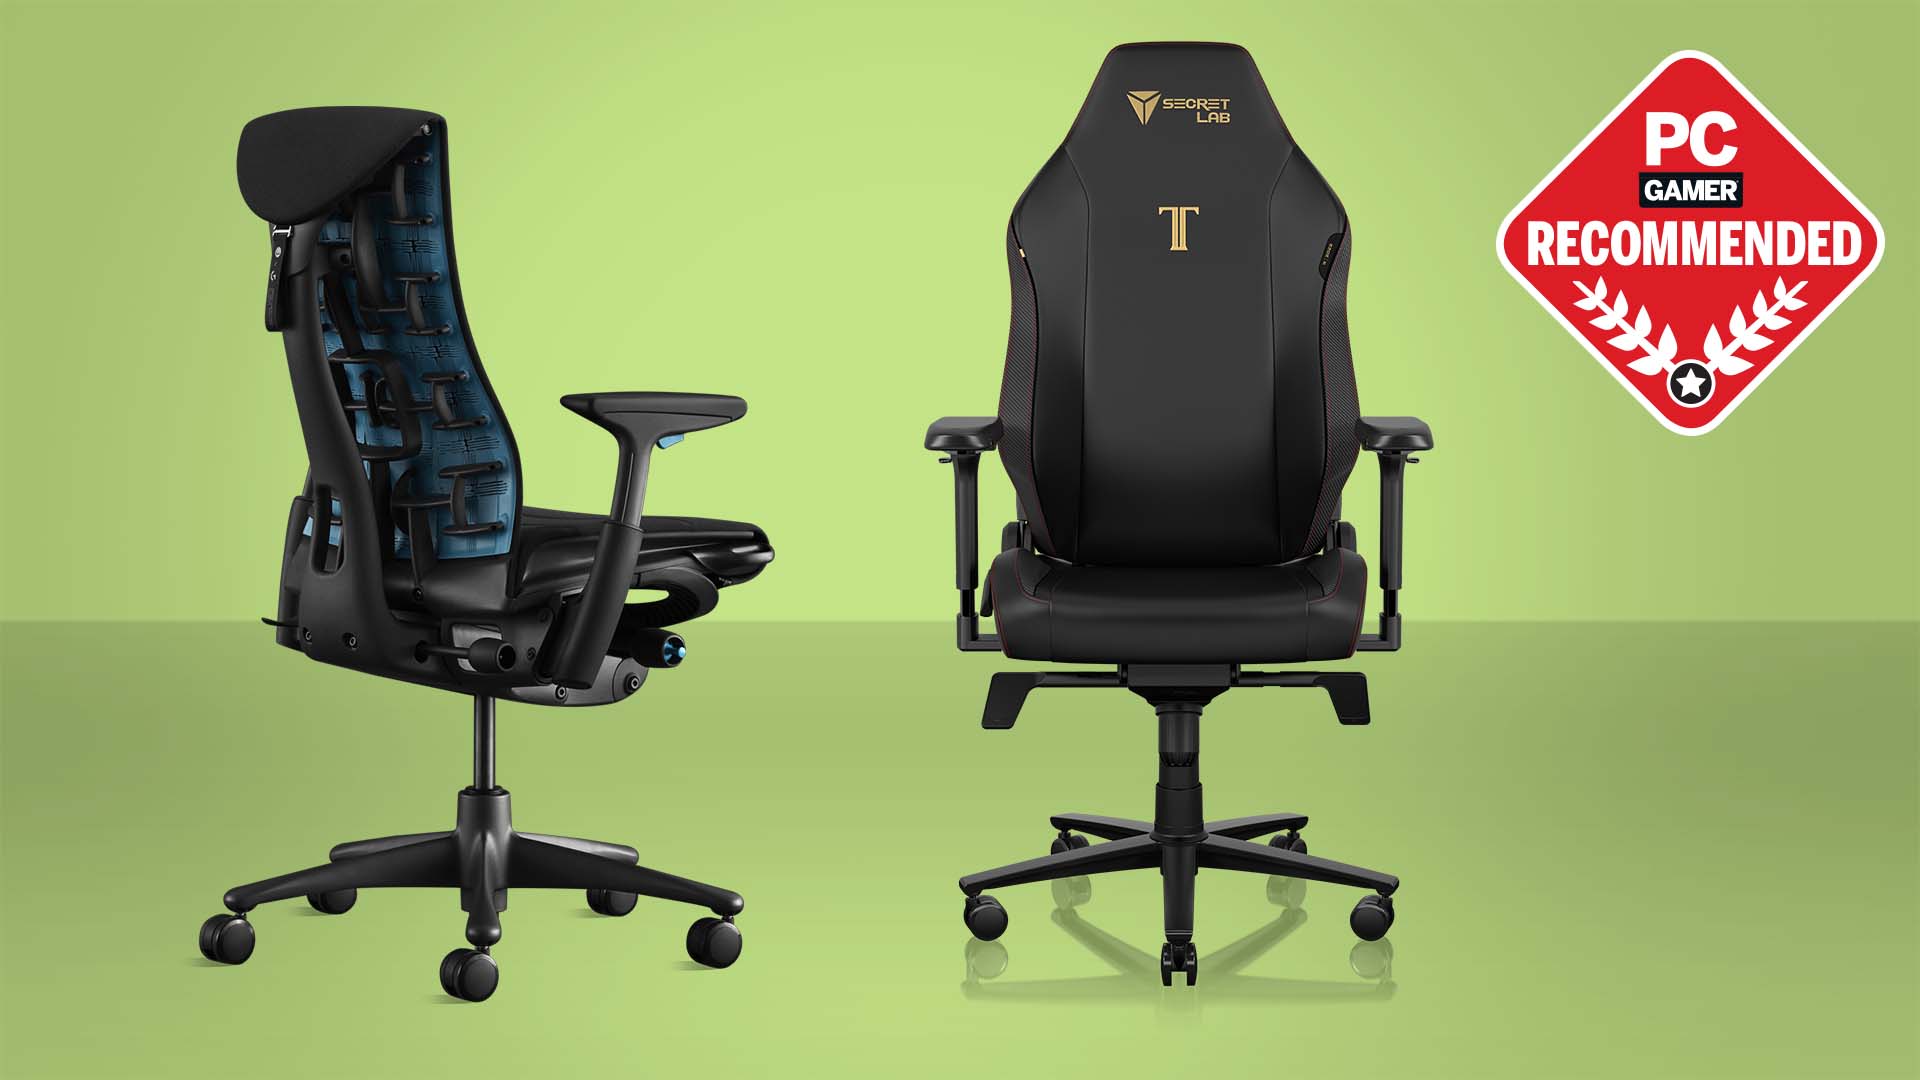 The Best Gaming Chairs In 2021 thumbnail